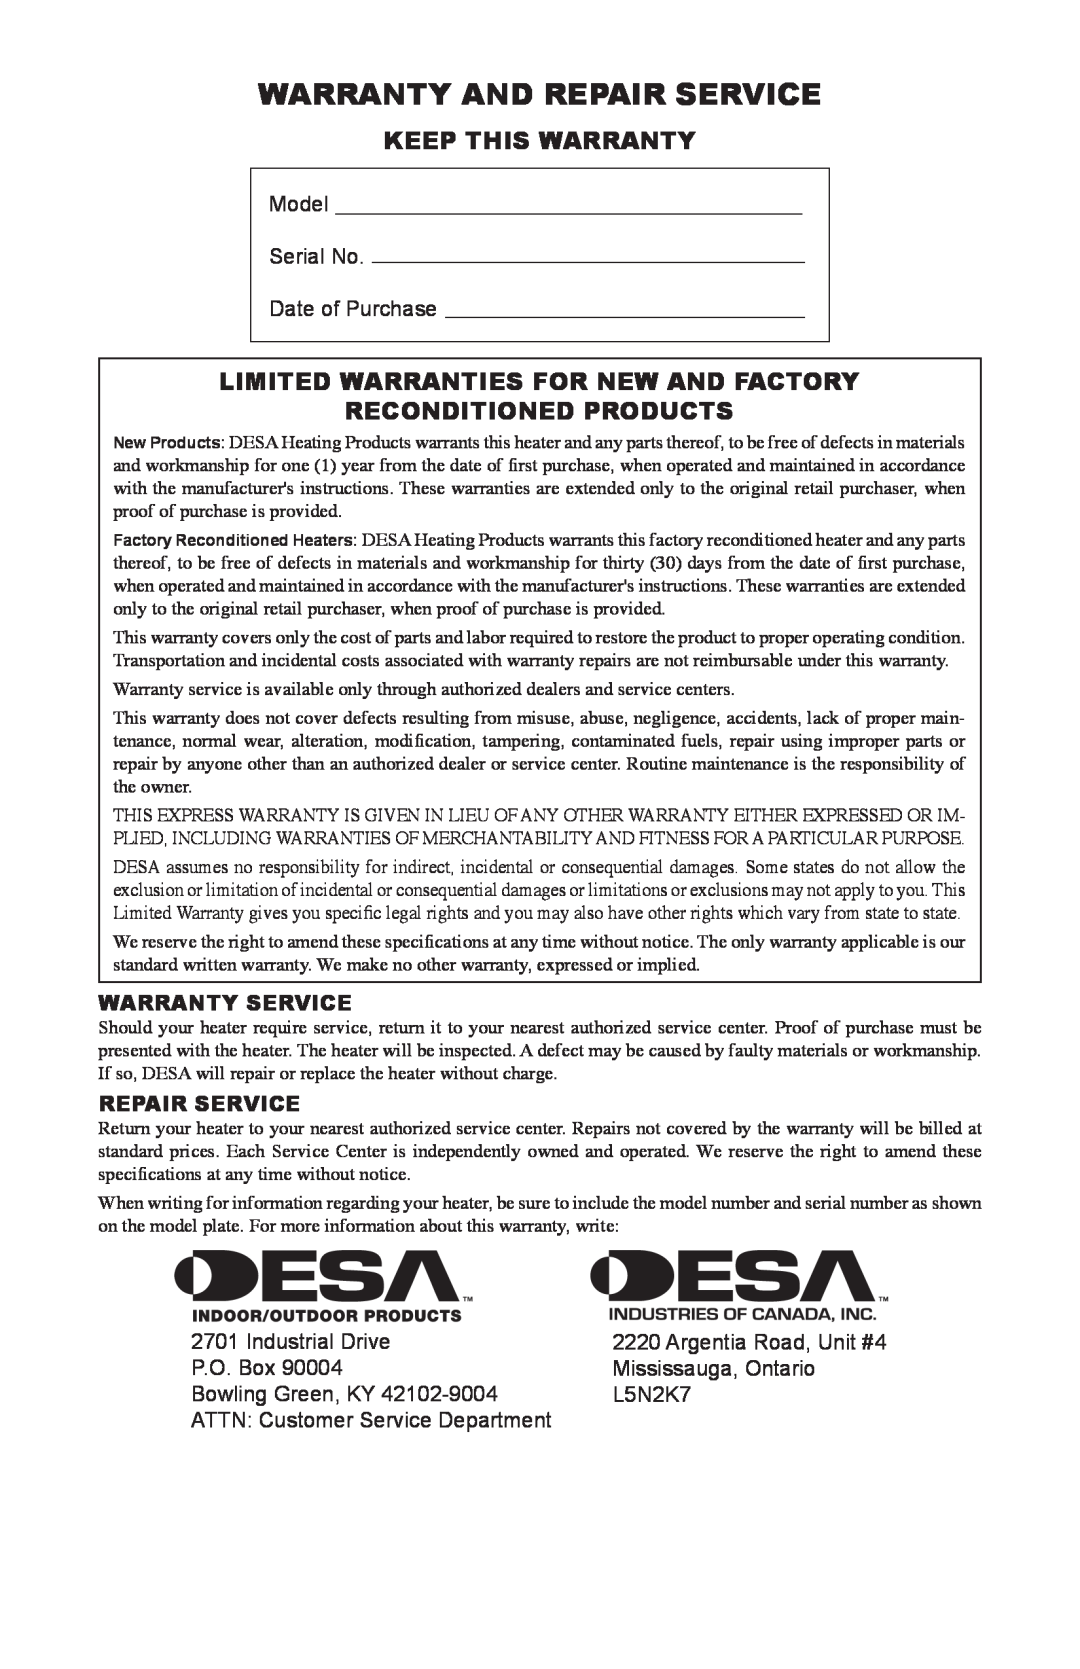 Desa 35-R Warranty And Repair Service, Keep This Warranty, Limited Warranties For New And Factory, Reconditioned Products 